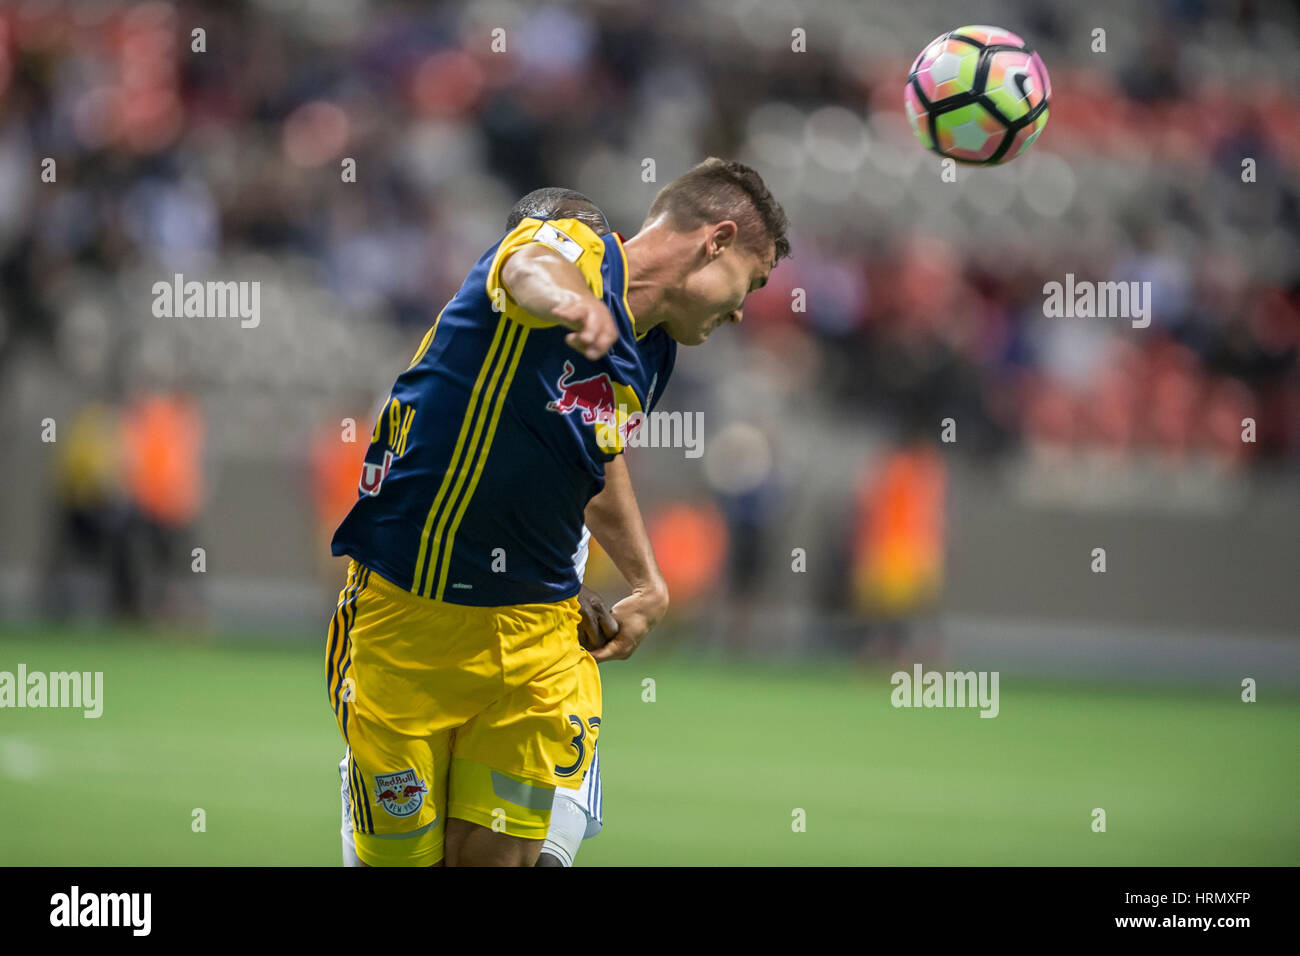 Vancouver, Canada. 2 March, 2017. Aaron Long (33) of New York Red Bulls, heading the ball. Concacaf Championship League 2016/17 Quarter Finals between Vancouver Whitecaps and New York Red Bulls, BC Place. Vancouver defeats New York 2-0, and advances to the semi-finals.© Gerry Rousseau/Alamy Live News Stock Photo